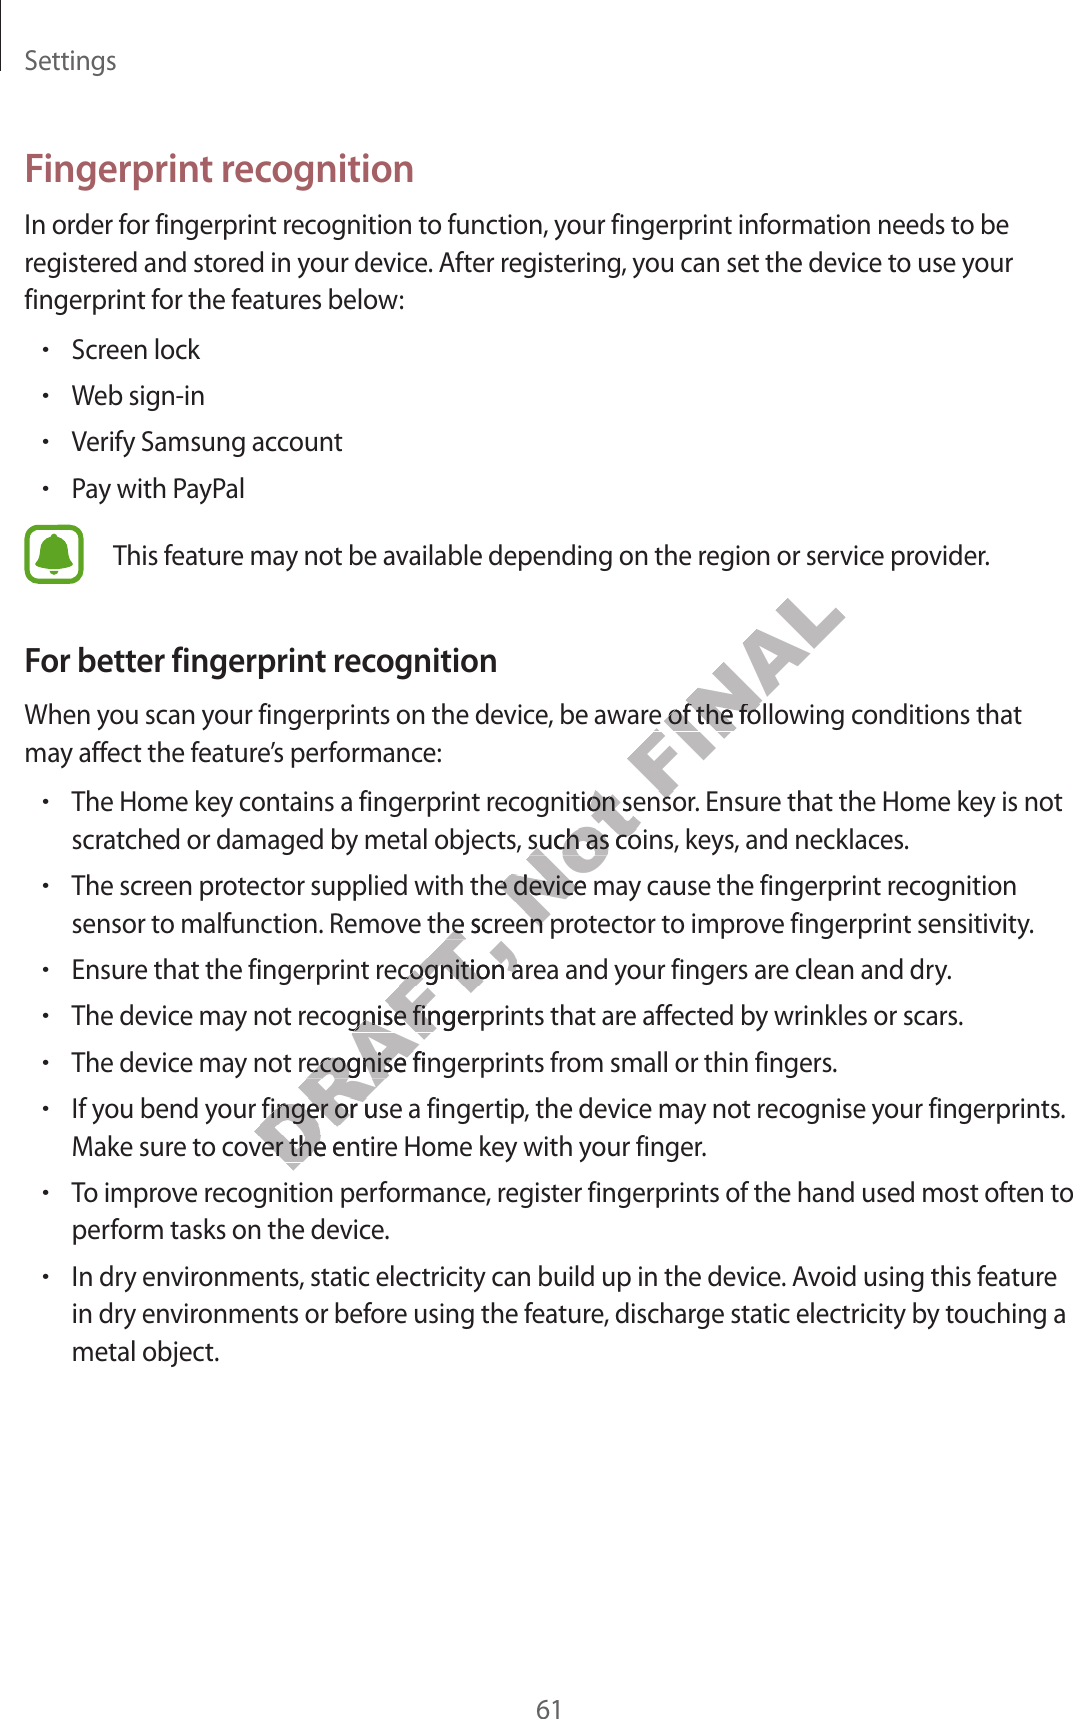 Settings61F ingerprin t r ec ognitionIn order for fingerprint r ecog nition to function, your fingerprint inf ormation needs t o be regist er ed and st or ed in y our device . A fter r egist ering , y ou can set the device t o use y our fingerprint for the f eatur es belo w:•Screen lock•Web sign-in•Verify Samsung account•P a y with PayPalThis f eatur e ma y not be a vailable depending on the r eg ion or service provider.For better fingerprint r ec ognitionWhen you scan y our fingerprints on the device, be aware of the f ollo wing c onditions that may aff ect the featur e’s performance:•The Home key contains a fingerprint r ec ognition sensor. Ensure that the Home key is not scratched or damaged b y metal objects, such as coins , key s , and necklaces.•The screen pr ot ector supplied with the device ma y cause the fingerprint rec og nition sensor to malfunction. Remove the screen pr ot ector to impr o v e fingerprint sensitivity.•Ensure that the fingerprint r ecog nition ar ea and y our fingers ar e clean and dry .•The device ma y not r ecog nise fingerprints that ar e aff ected by wrinkles or scars.•The device ma y not r ecog nise fingerprints fr om small or thin fingers .•If you bend your finger or use a fingertip, the device ma y not r ec ognise y our fingerprints . Make sure to co v er the entir e Home key with y our finger.•To improv e r ec og nition performanc e , r egist er fingerprints of the hand used most often to perform tasks on the device .•In dry environments , sta tic electricity can build up in the device. A v oid using this f ea tur e in dry envir onments or before using the featur e, discharge static electricity by touching a metal object.DRAFT, sensor to malfunction. Remove the screen pr ot ector to impr o v e fingerprint sensitivity.DRAFT, sensor to malfunction. Remove the screen pr ot ector to impr o v e fingerprint sensitivity.Ensure that the fingerprint r ecog nition ar ea and y our fingers ar e clean and dry .DRAFT, Ensure that the fingerprint r ecog nition ar ea and y our fingers ar e clean and dry .The device ma y not r ecog nise fingerprints that ar e aff ected by wrinkles or scars.DRAFT, The device ma y not r ecog nise fingerprints that ar e aff ected by wrinkles or scars.The device ma y not r ecog nise fingerprints fr om small or thin fingers .DRAFT, The device ma y not r ecog nise fingerprints fr om small or thin fingers .DRAFT, If you bend your finger or use a fingertip, the device ma y not r ec ognise y our fingerprints . DRAFT, If you bend your finger or use a fingertip, the device ma y not r ec ognise y our fingerprints . Make sure to co v er the entir e Home key with y our finger.DRAFT, Make sure to co v er the entir e Home key with y our finger.To improv e r ec og nition performanc e , r egist er fingerprints of the hand used most often to DRAFT, To improv e r ec og nition performanc e , r egist er fingerprints of the hand used most often to Not The Home key contains a fingerprint r ec ognition sensor. Ensure that the Home key is not Not The Home key contains a fingerprint r ec ognition sensor. Ensure that the Home key is not scratched or damaged b y metal objects, such as coins , key s , and necklaces.Not scratched or damaged b y metal objects, such as coins , key s , and necklaces.The screen pr ot ector supplied with the device ma y cause the fingerprint rec og nition Not The screen pr ot ector supplied with the device ma y cause the fingerprint rec og nition sensor to malfunction. Remove the screen pr ot ector to impr o v e fingerprint sensitivity.Not sensor to malfunction. Remove the screen pr ot ector to impr o v e fingerprint sensitivity.FINALWhen you scan y our fingerprints on the device, be aware of the f ollo wing c onditions that FINALWhen you scan y our fingerprints on the device, be aware of the f ollo wing c onditions that The Home key contains a fingerprint r ec ognition sensor. Ensure that the Home key is not FINALThe Home key contains a fingerprint r ec ognition sensor. Ensure that the Home key is not 